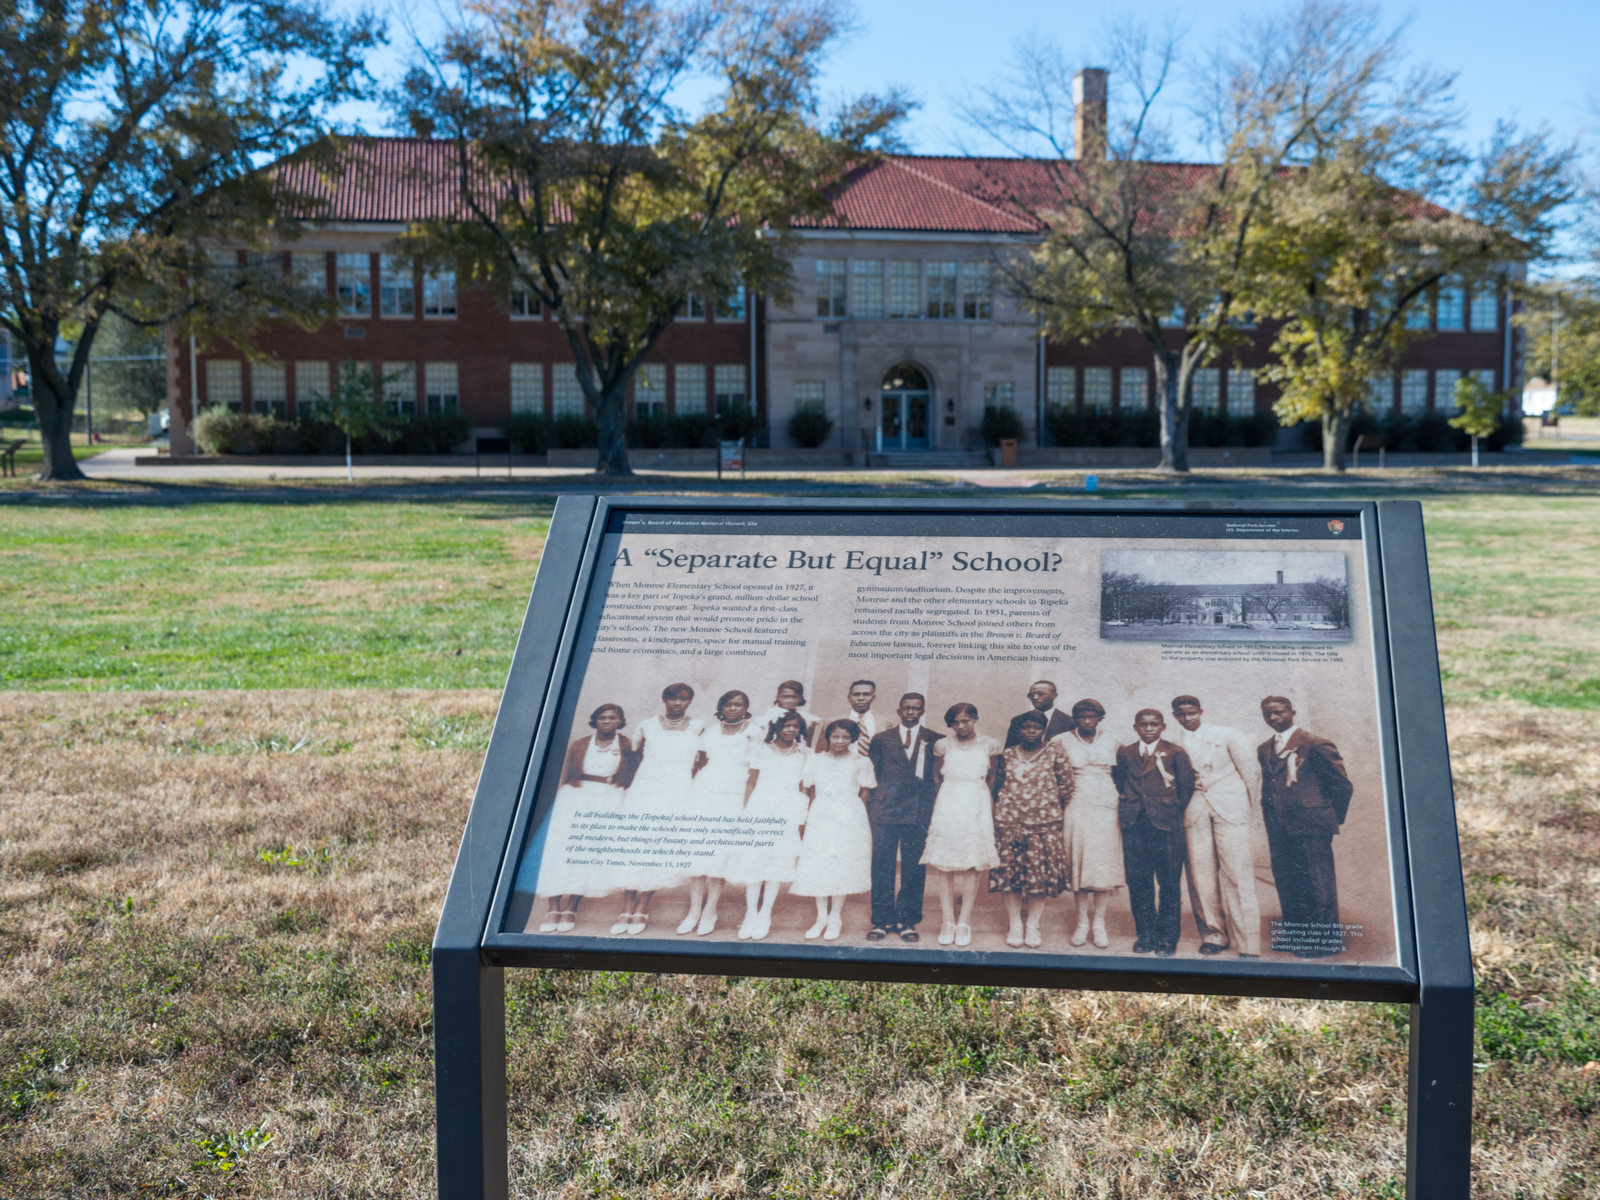 An old photograph of colored people exhibited in front of the main entrance, Brown v. Board of Education National Historic Site, on one of the best things to see in Kansas